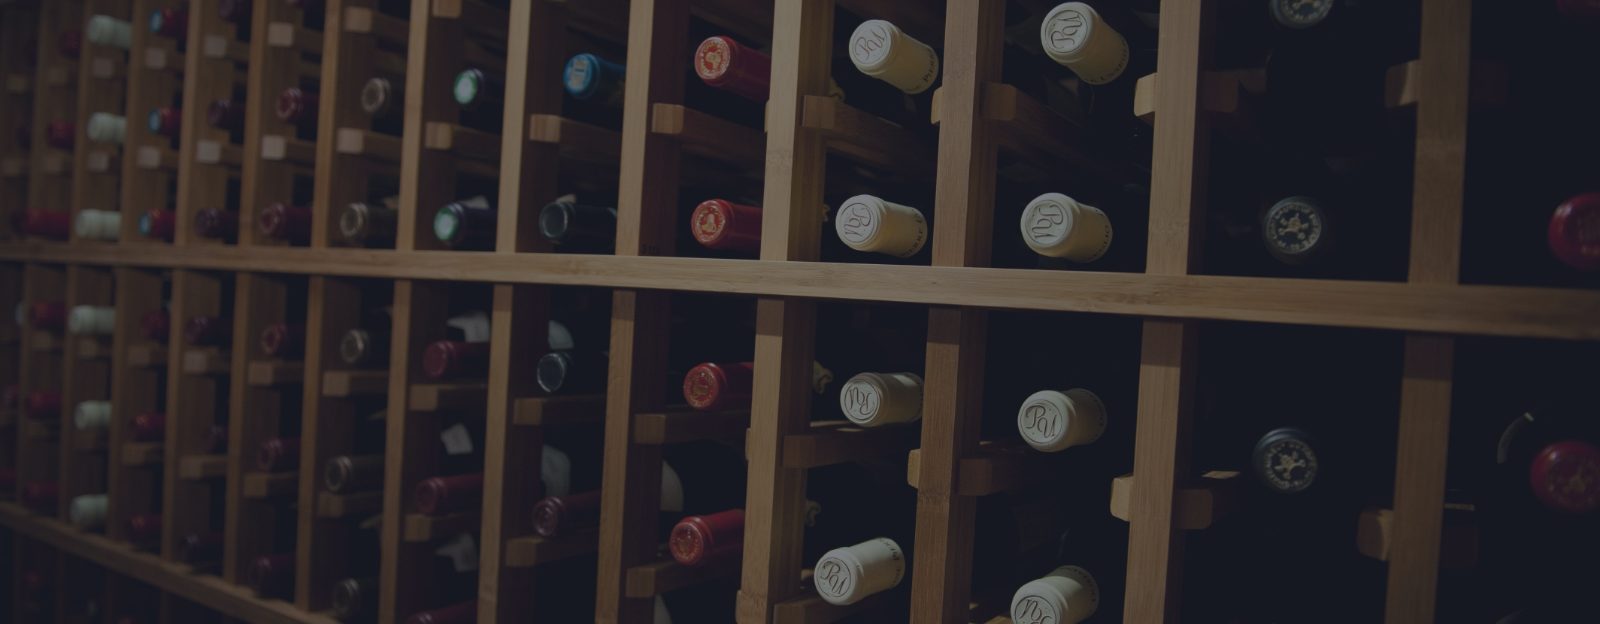 Wine bottles rest in a cellar that has been treated with professional wine organization from UOVO Wine.